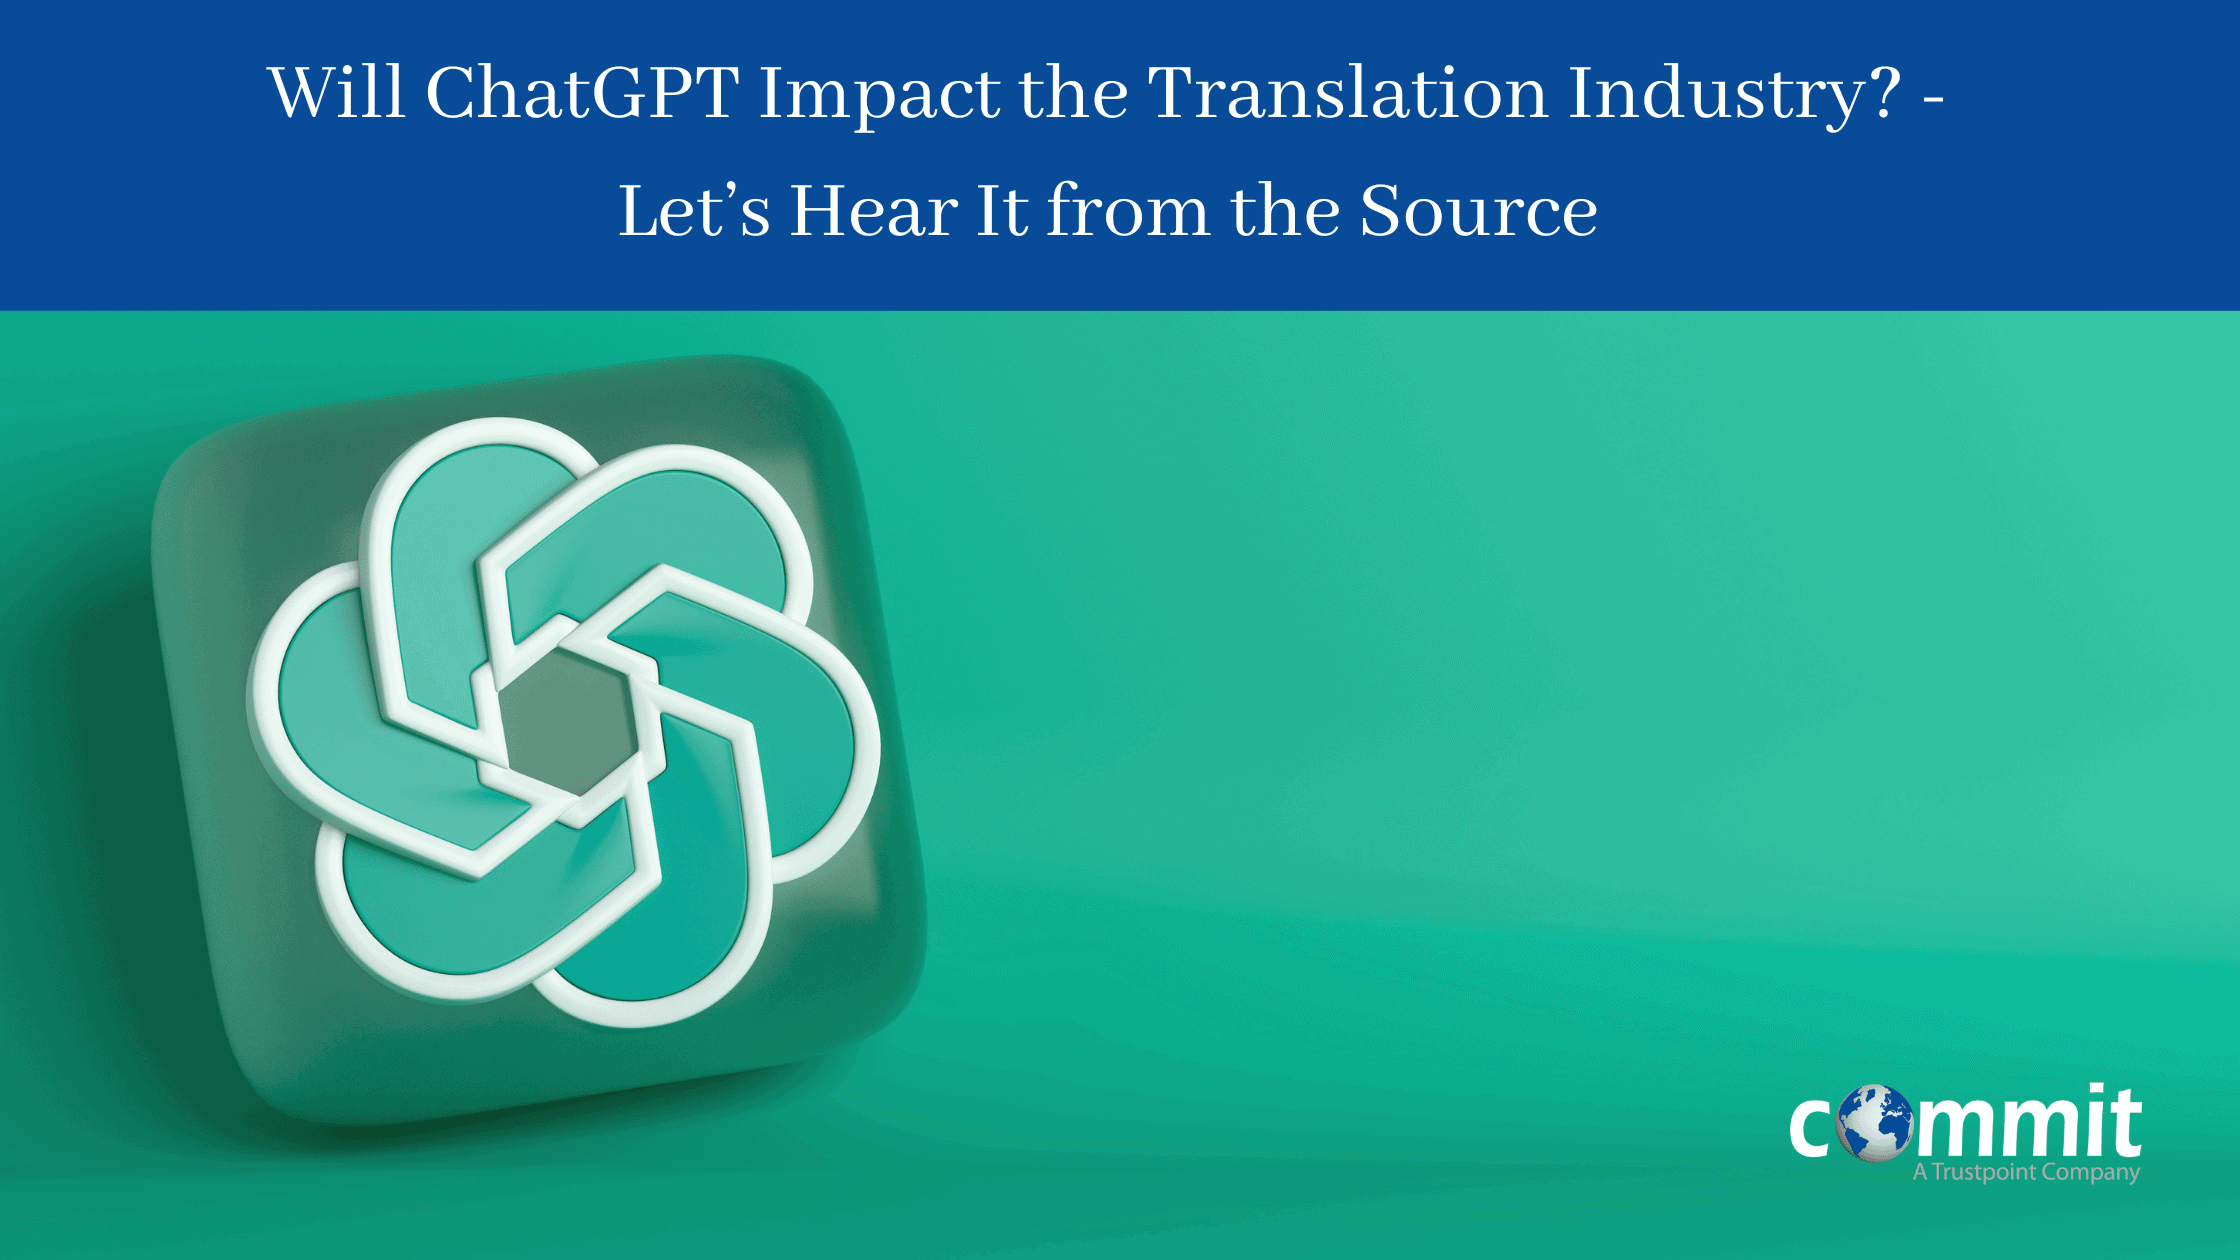 Will ChatGPT Impact the Translation Industry? - Let’s Hear It from the Source